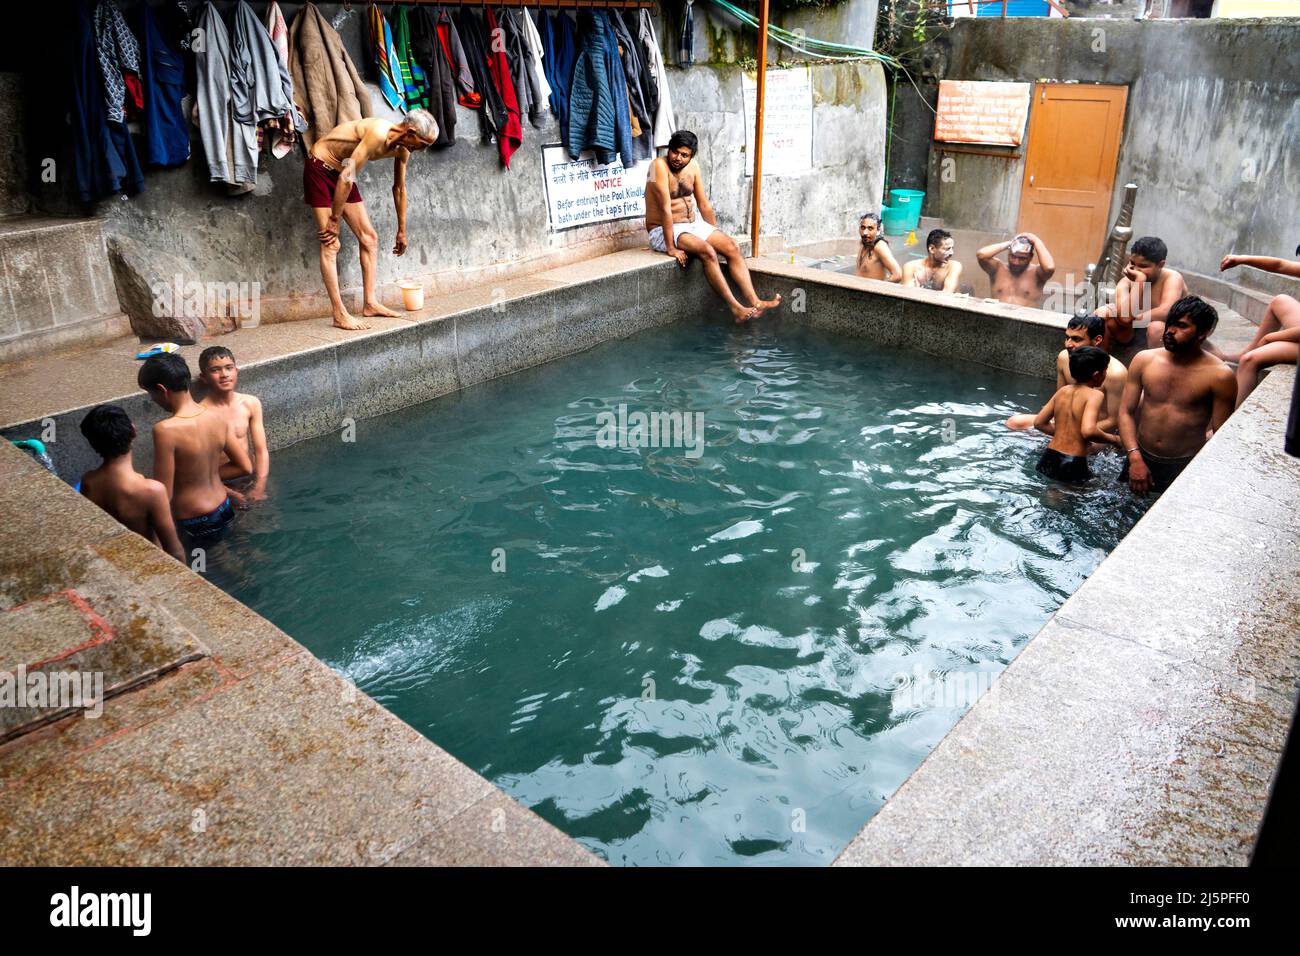 The village of Vashist is famous for its sulphurous Hot Water Springs and is a popular attraction among tourist and pilgrims. himachal pradesh. Stock Photo